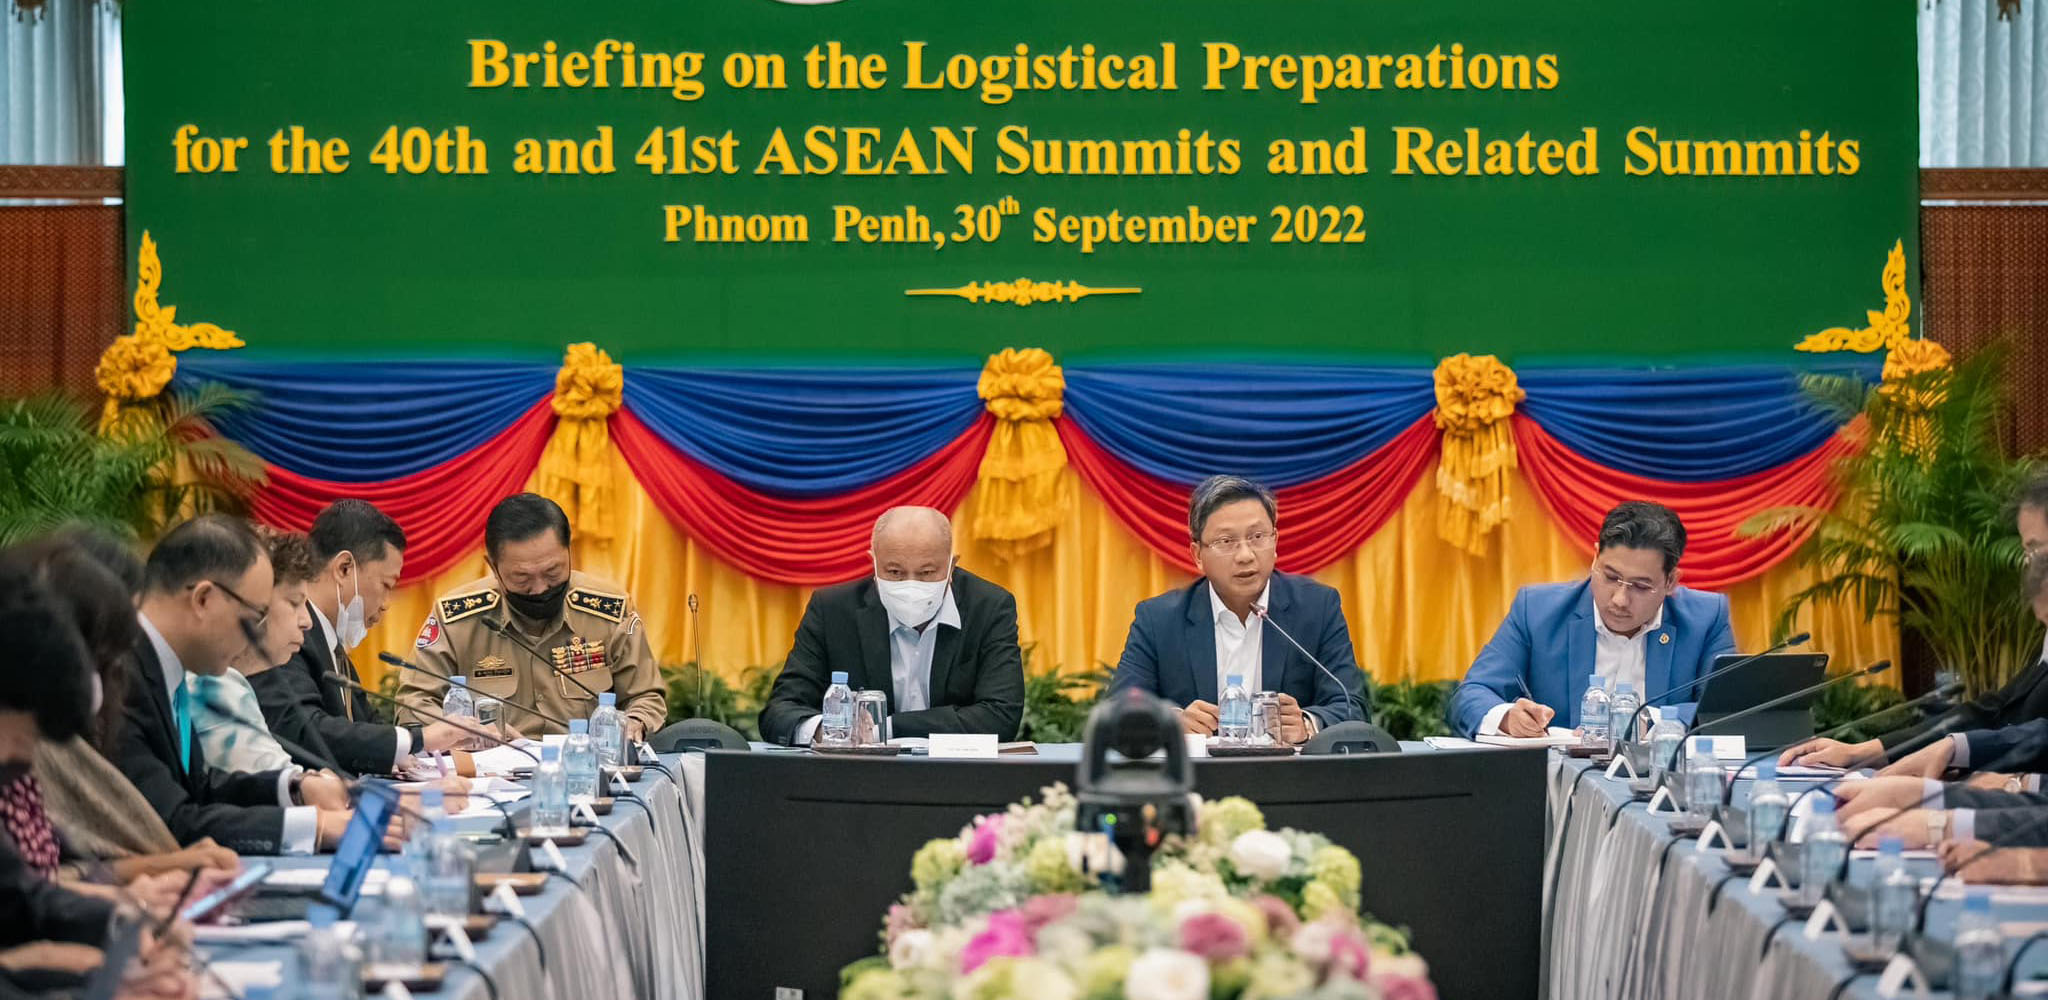 Briefing on  Logistical Preparations for the 40th and 41st ASEAN Summits and Related Summits and 2nd ASEAN Global Dialogue ( 30 September 2022 )  